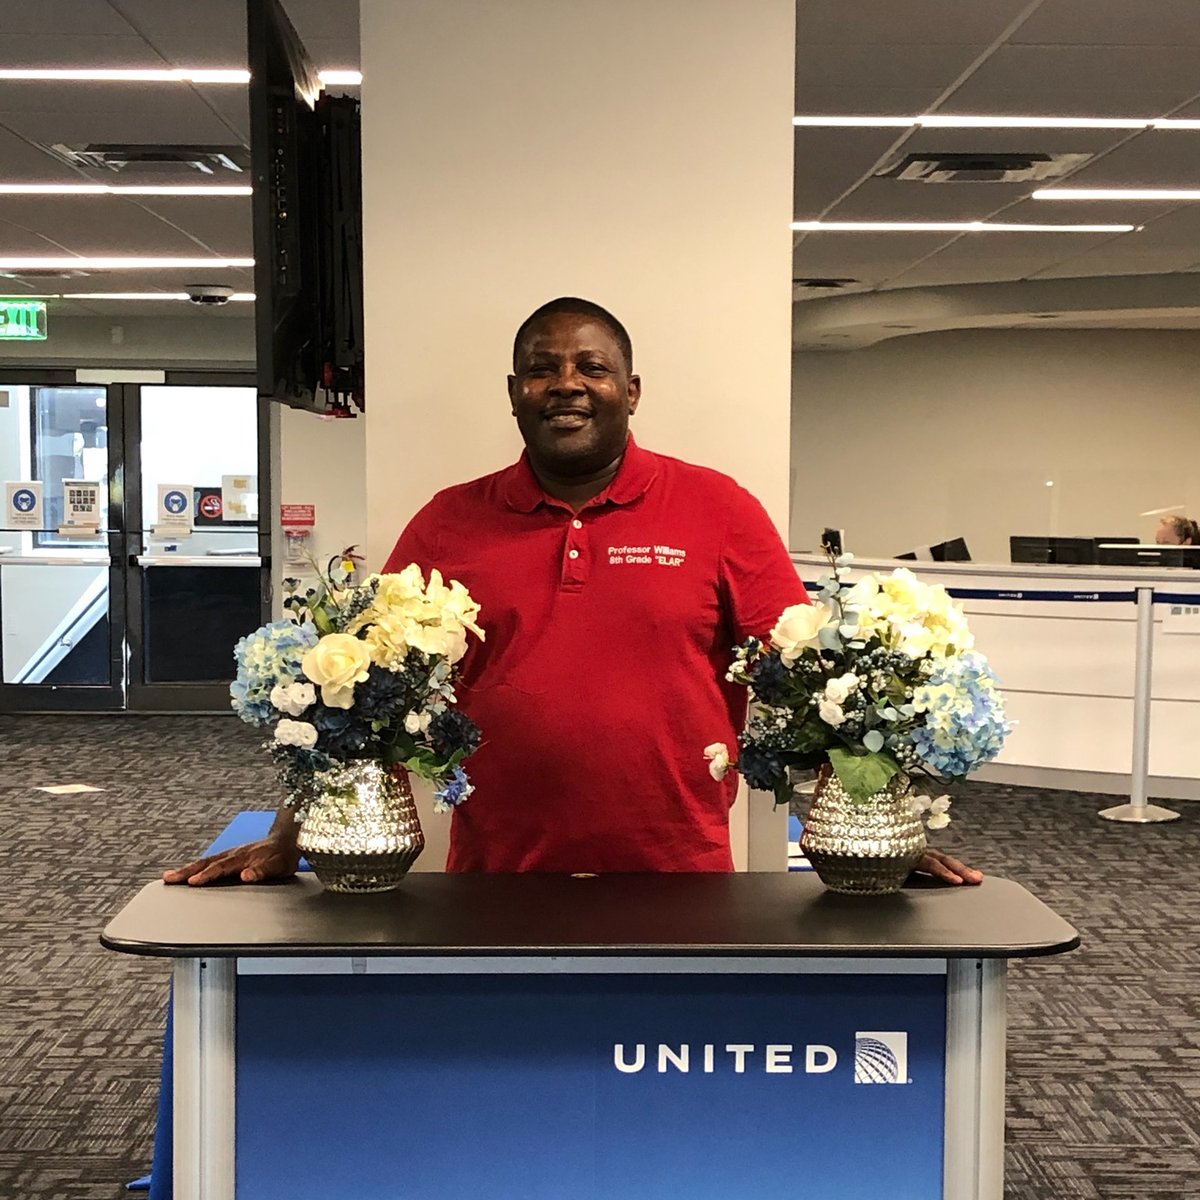 #UAIFSbaseIAH Mallory is taking the VSP2 to return to teaching 8th grade in HISD.  We have enjoyed working with him and wish him all the best that life offers.  #beingunited